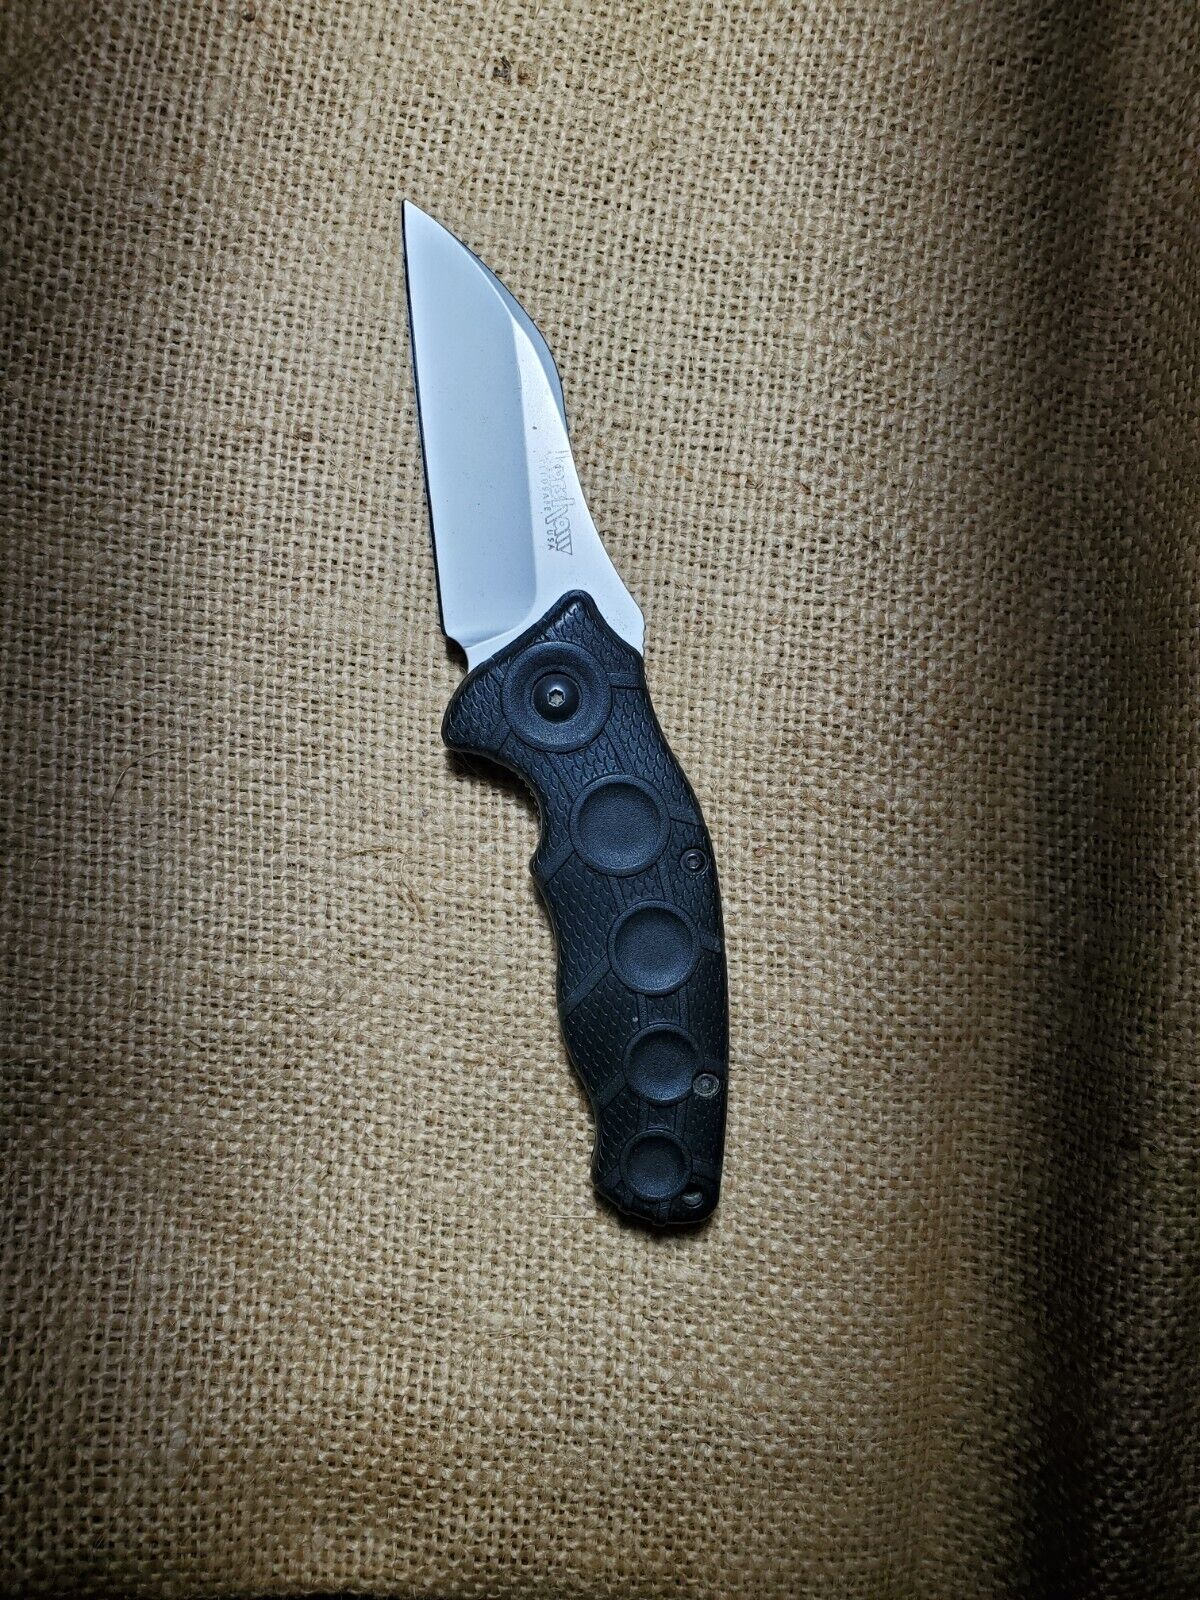 kershaw made in u.s.a 1820 assisted opening